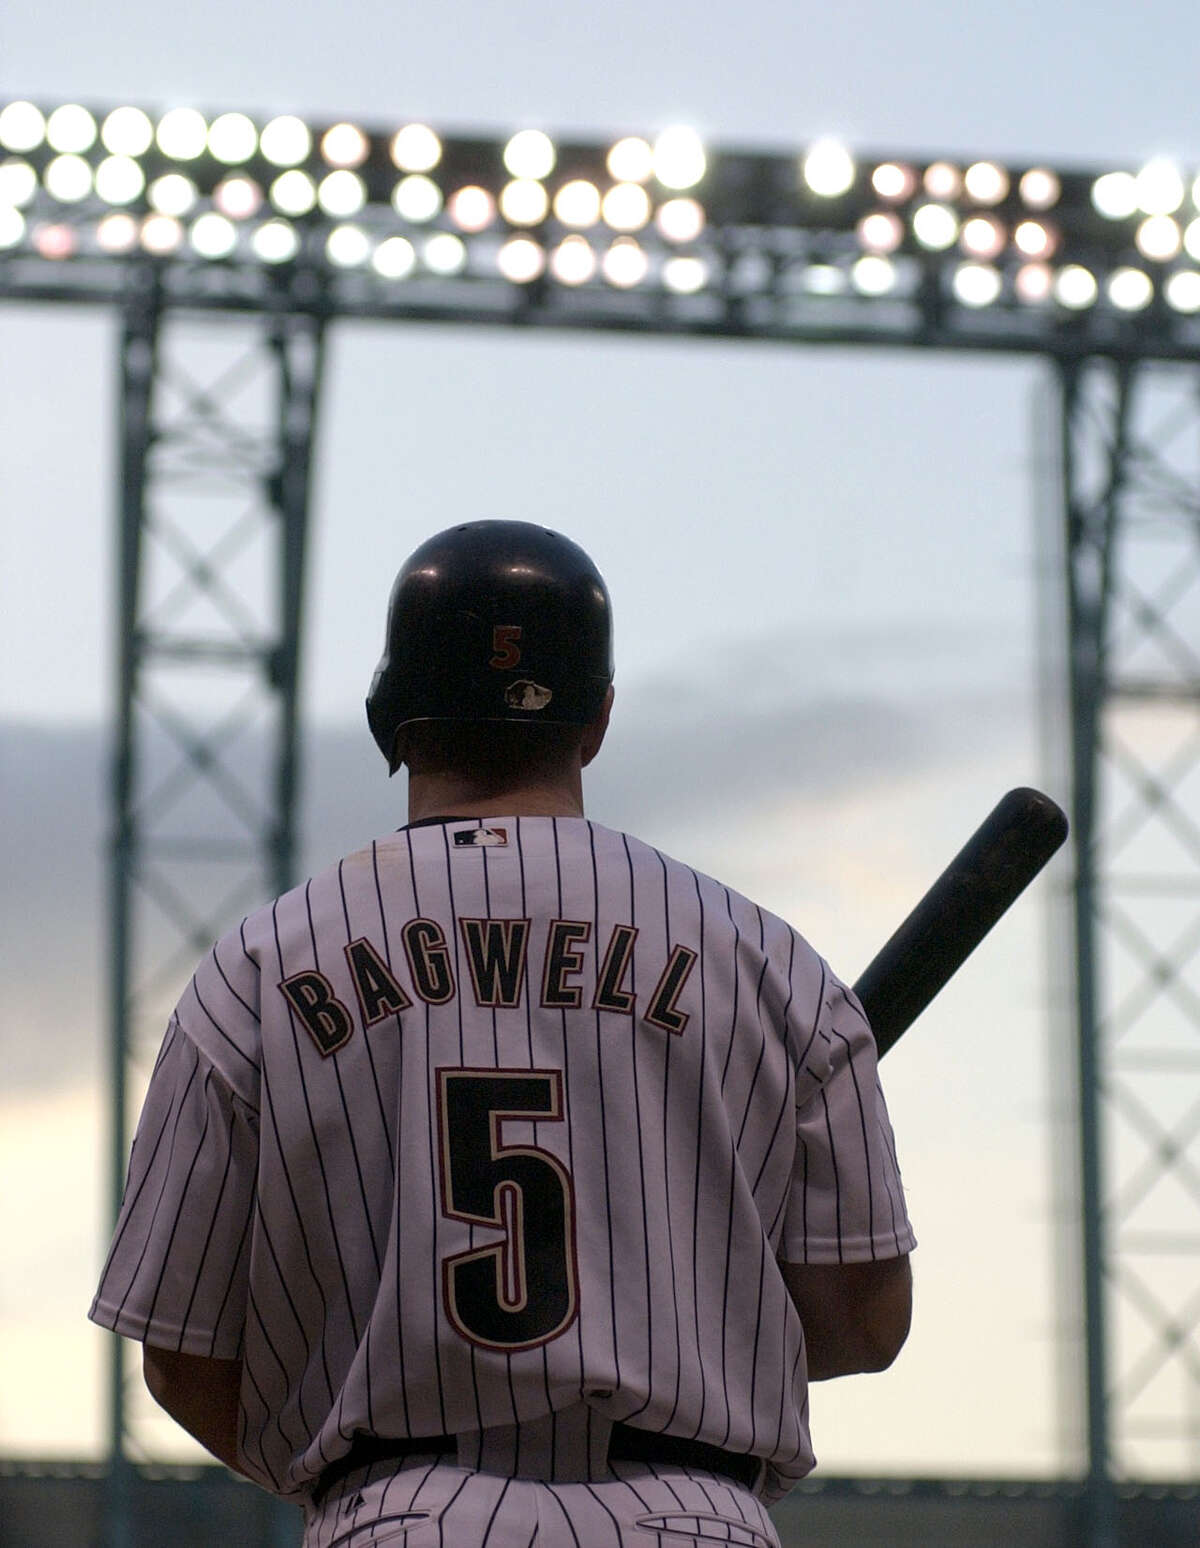 Bagwell deserves place in Cooperstown, role with Astros